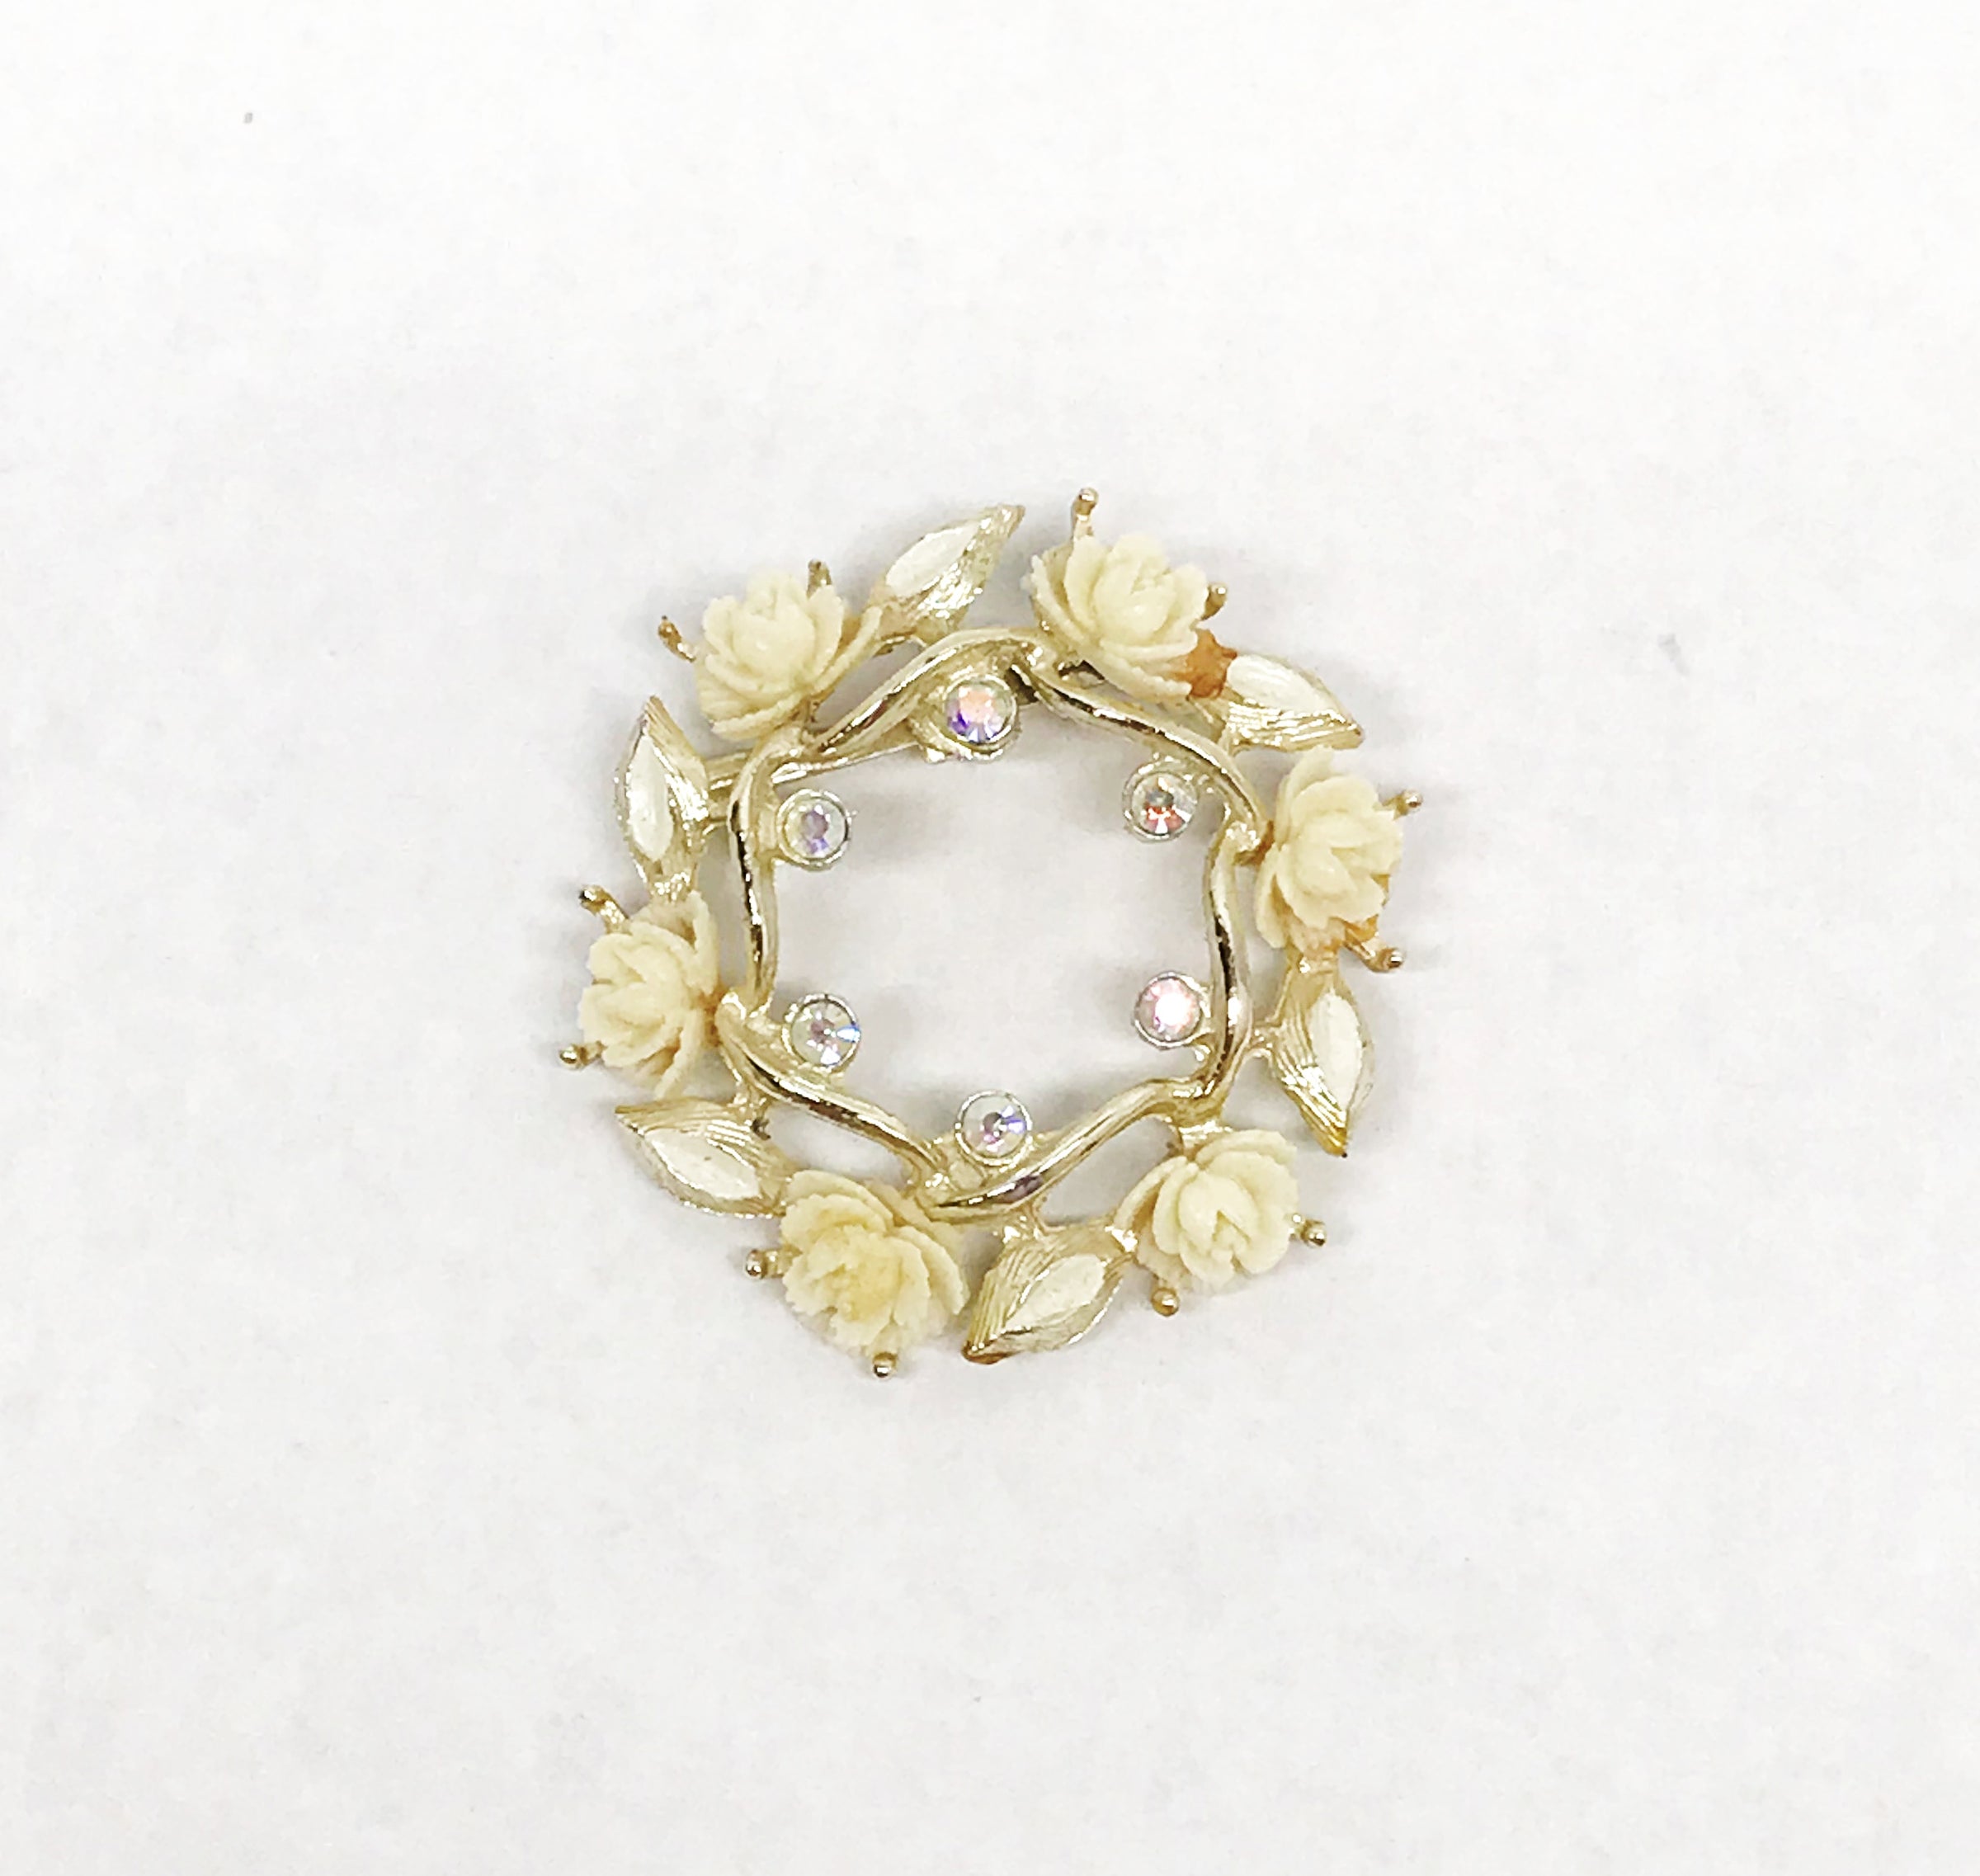 www.hersandhistreasures.com/products/celluloid-roses-and-ab-rhinestone-gold-tone-circle-brooch-pin